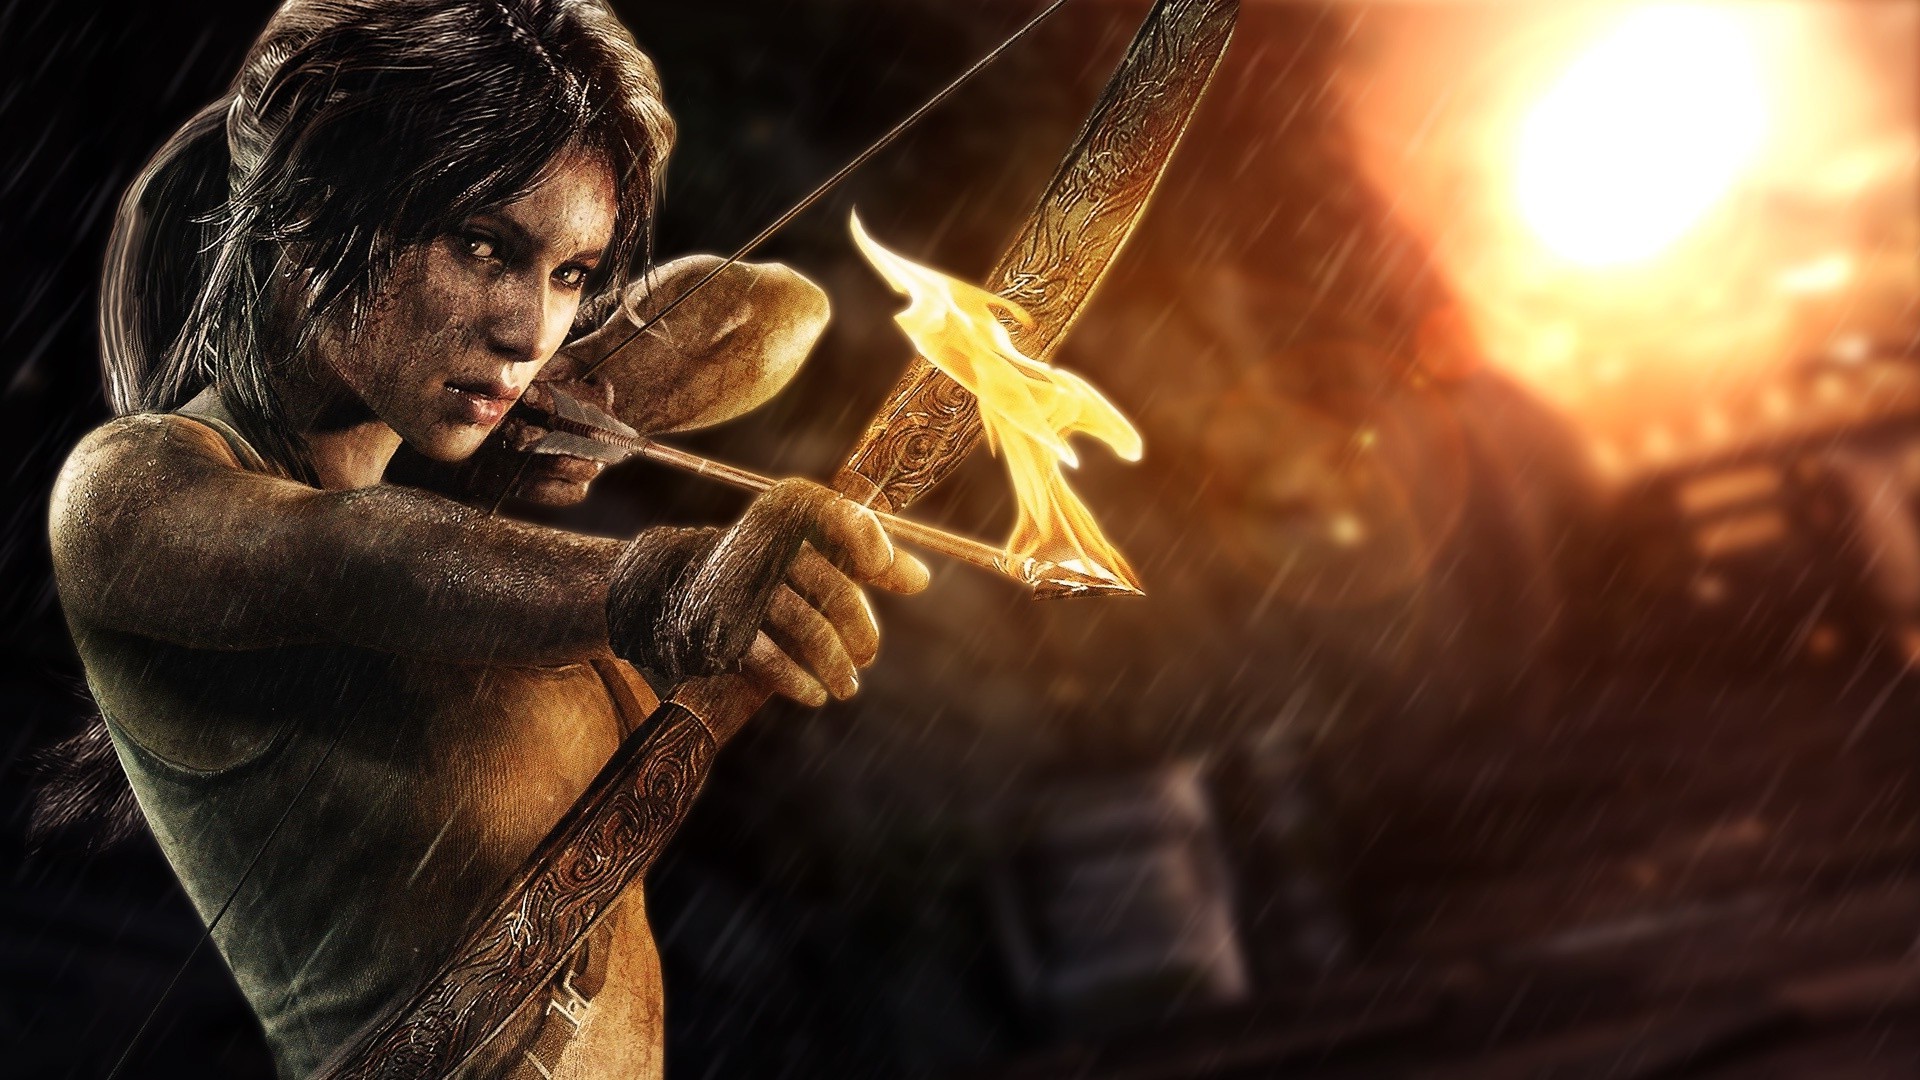 1080p rise of the tomb raider